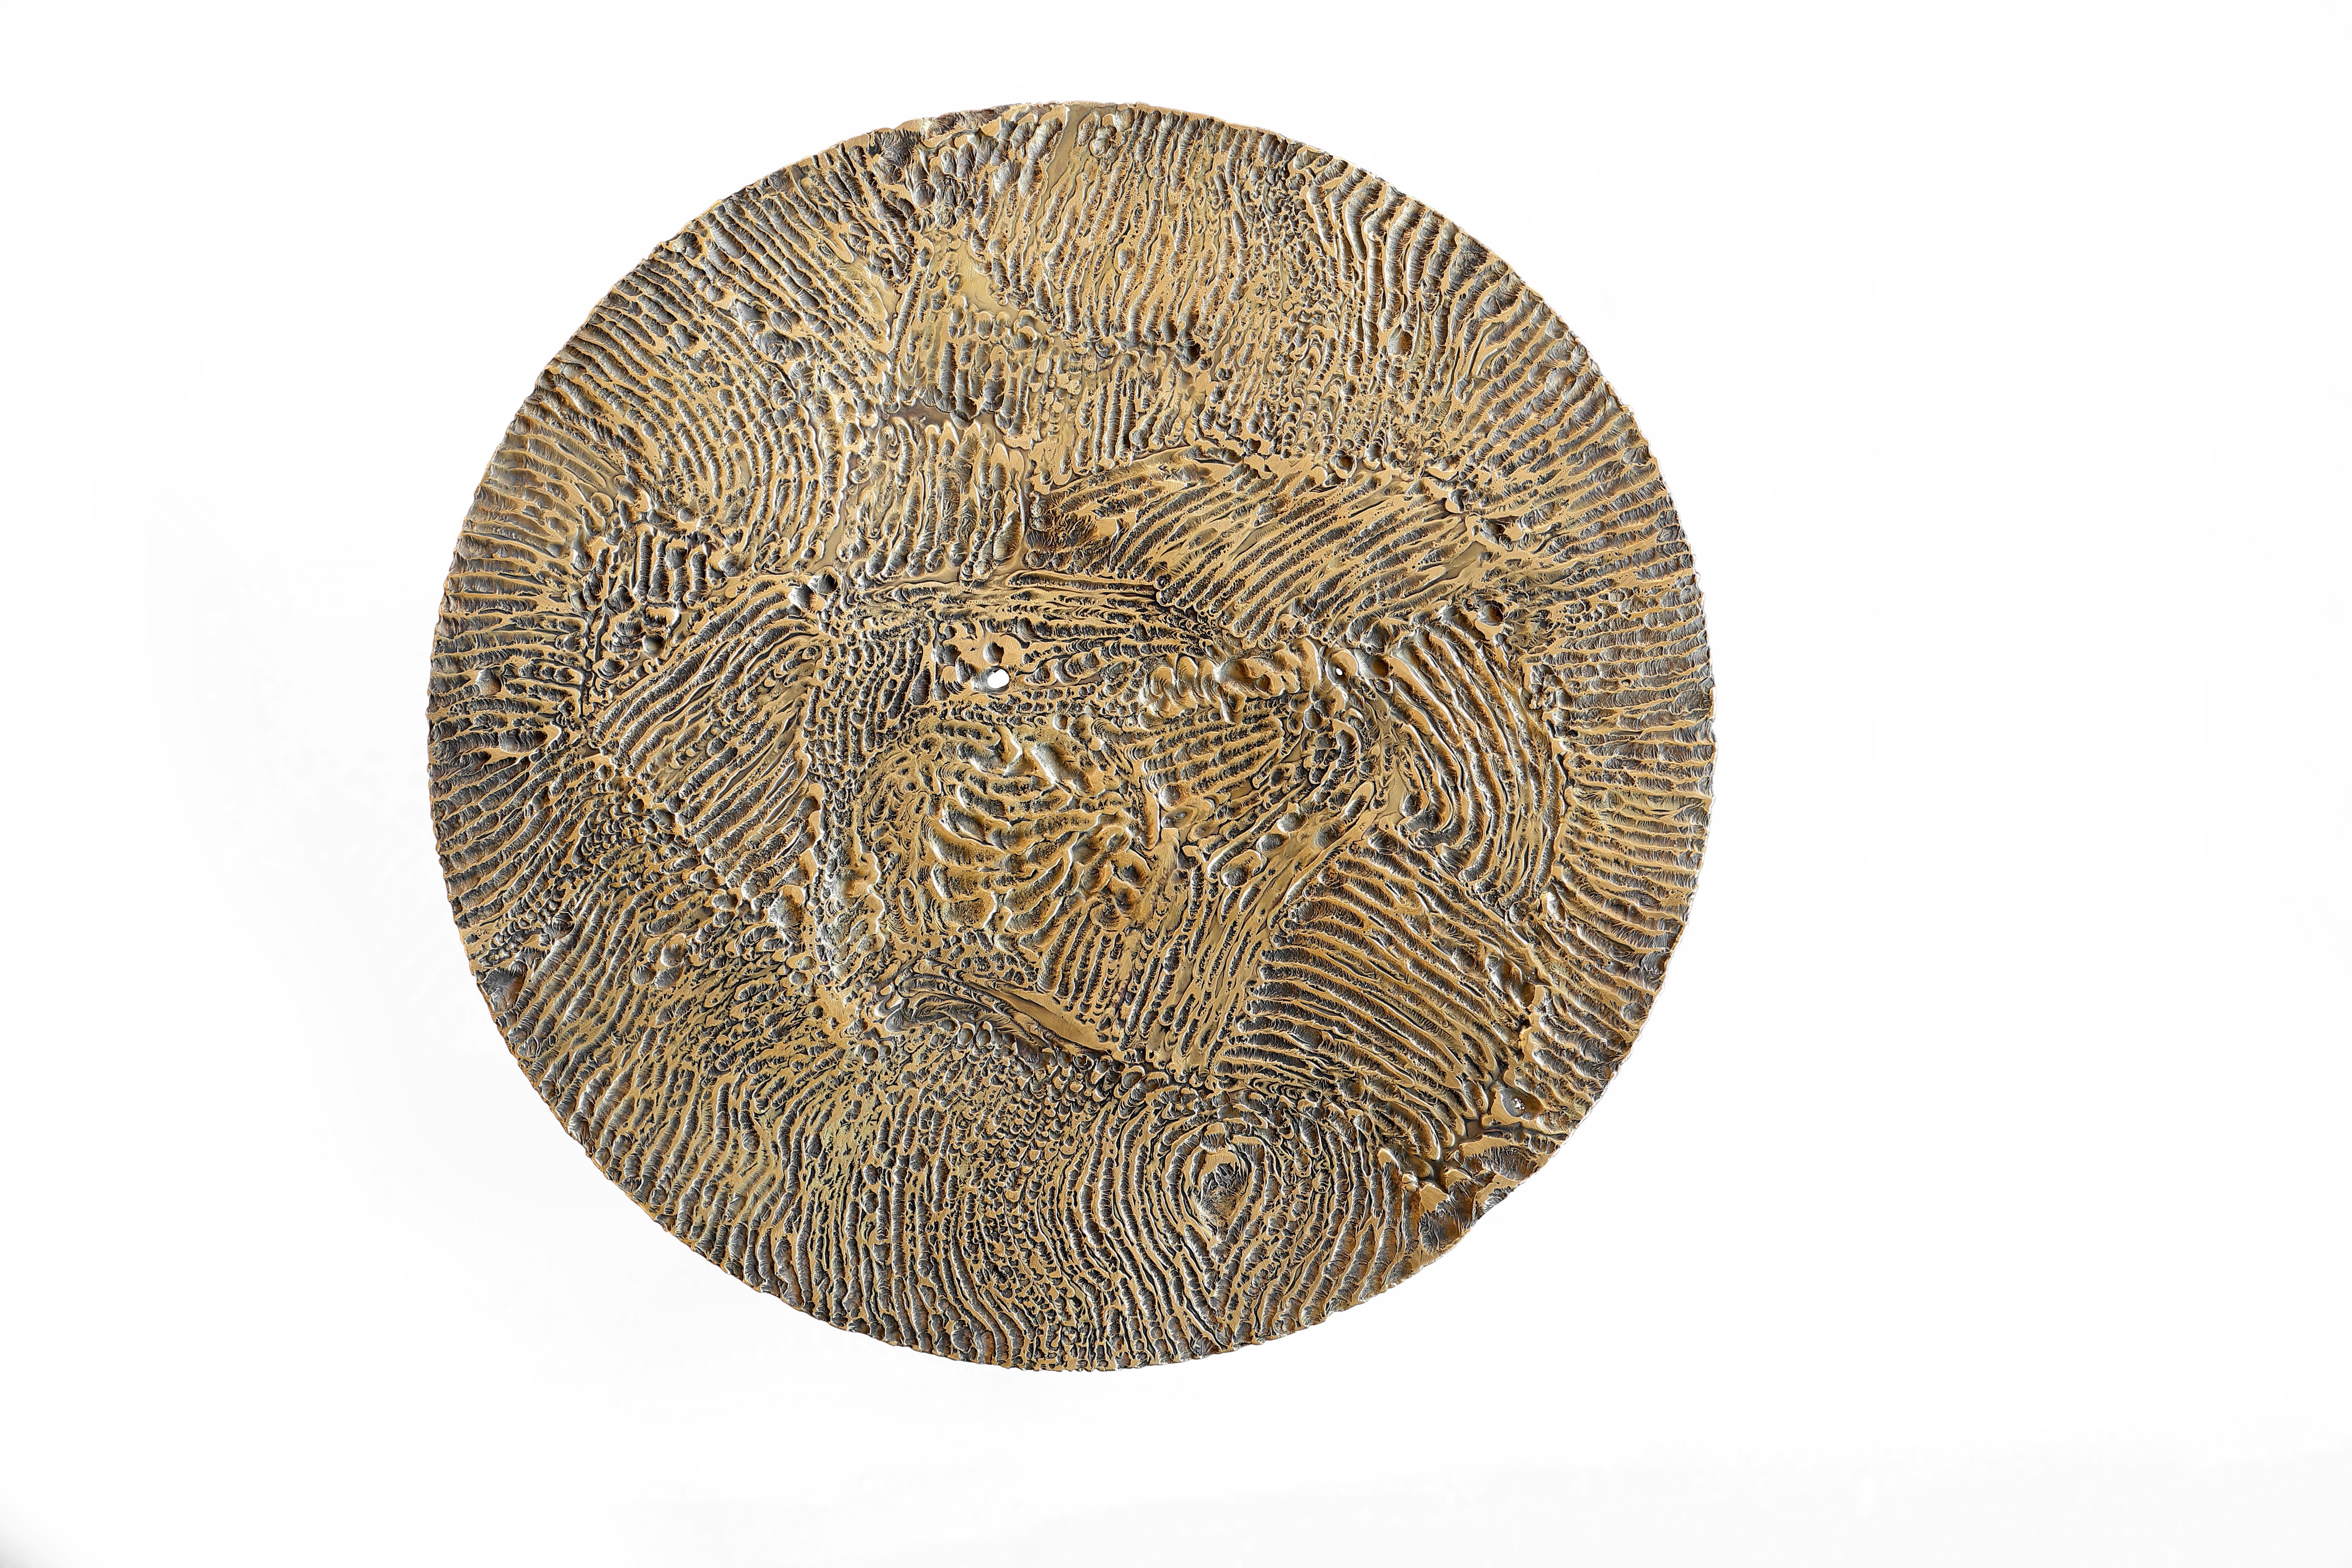 Brass hand-sculpted side table by Samuel Costantini
Entirely handmade by the artist
Title: Golden Waves
Edition 15 + 2 AP
Measures: Diameter 500m, height 550 mm.
Diameter 19.685, height 21.653 inches

Time leaves its mark on everything. Its